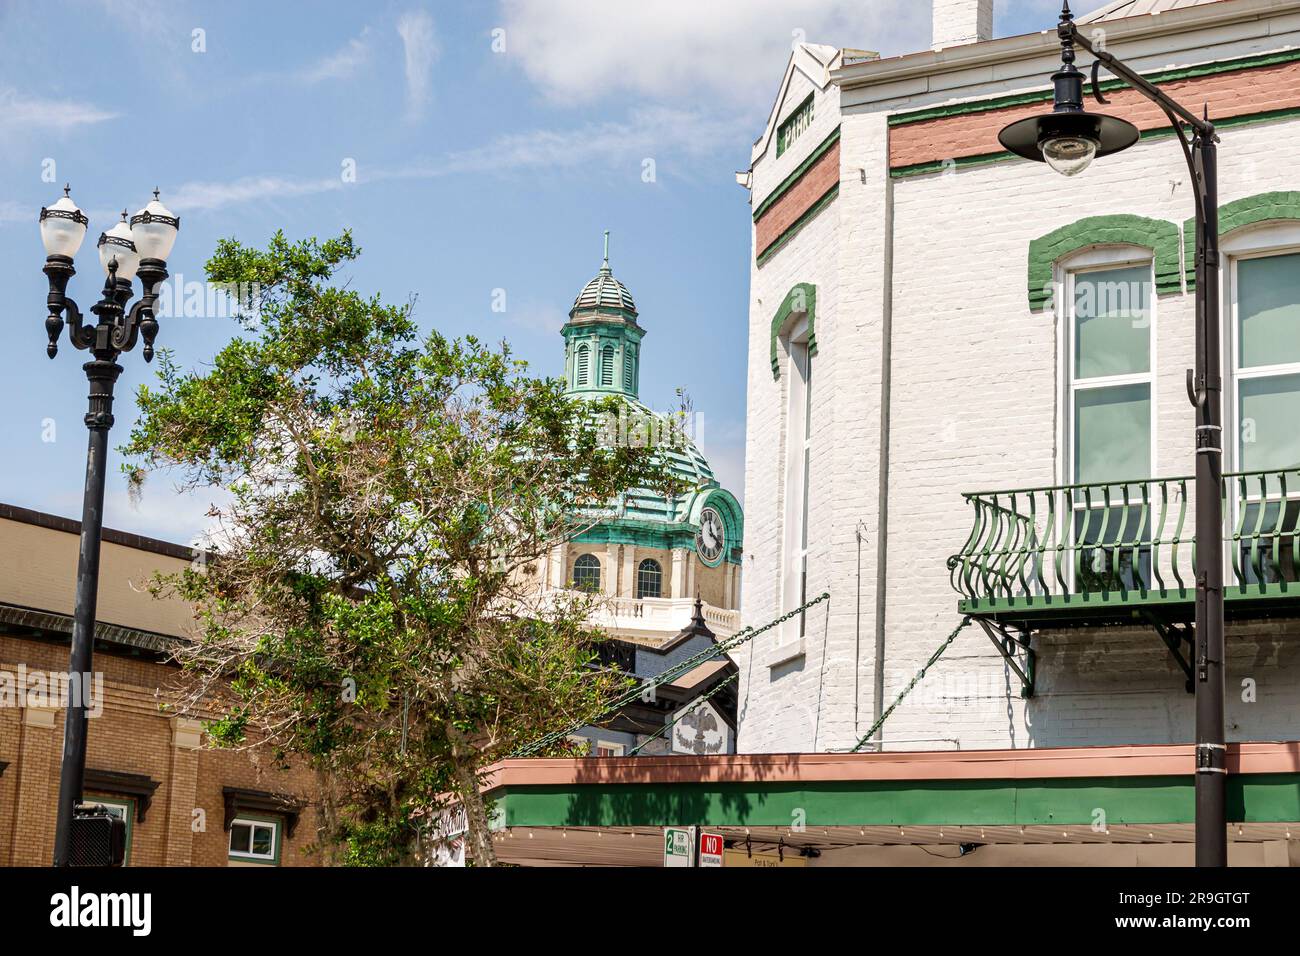 DeLand Florida,small town main street city historic downtown shopping district restored buildings,Volusia County Court House dome Stock Photo